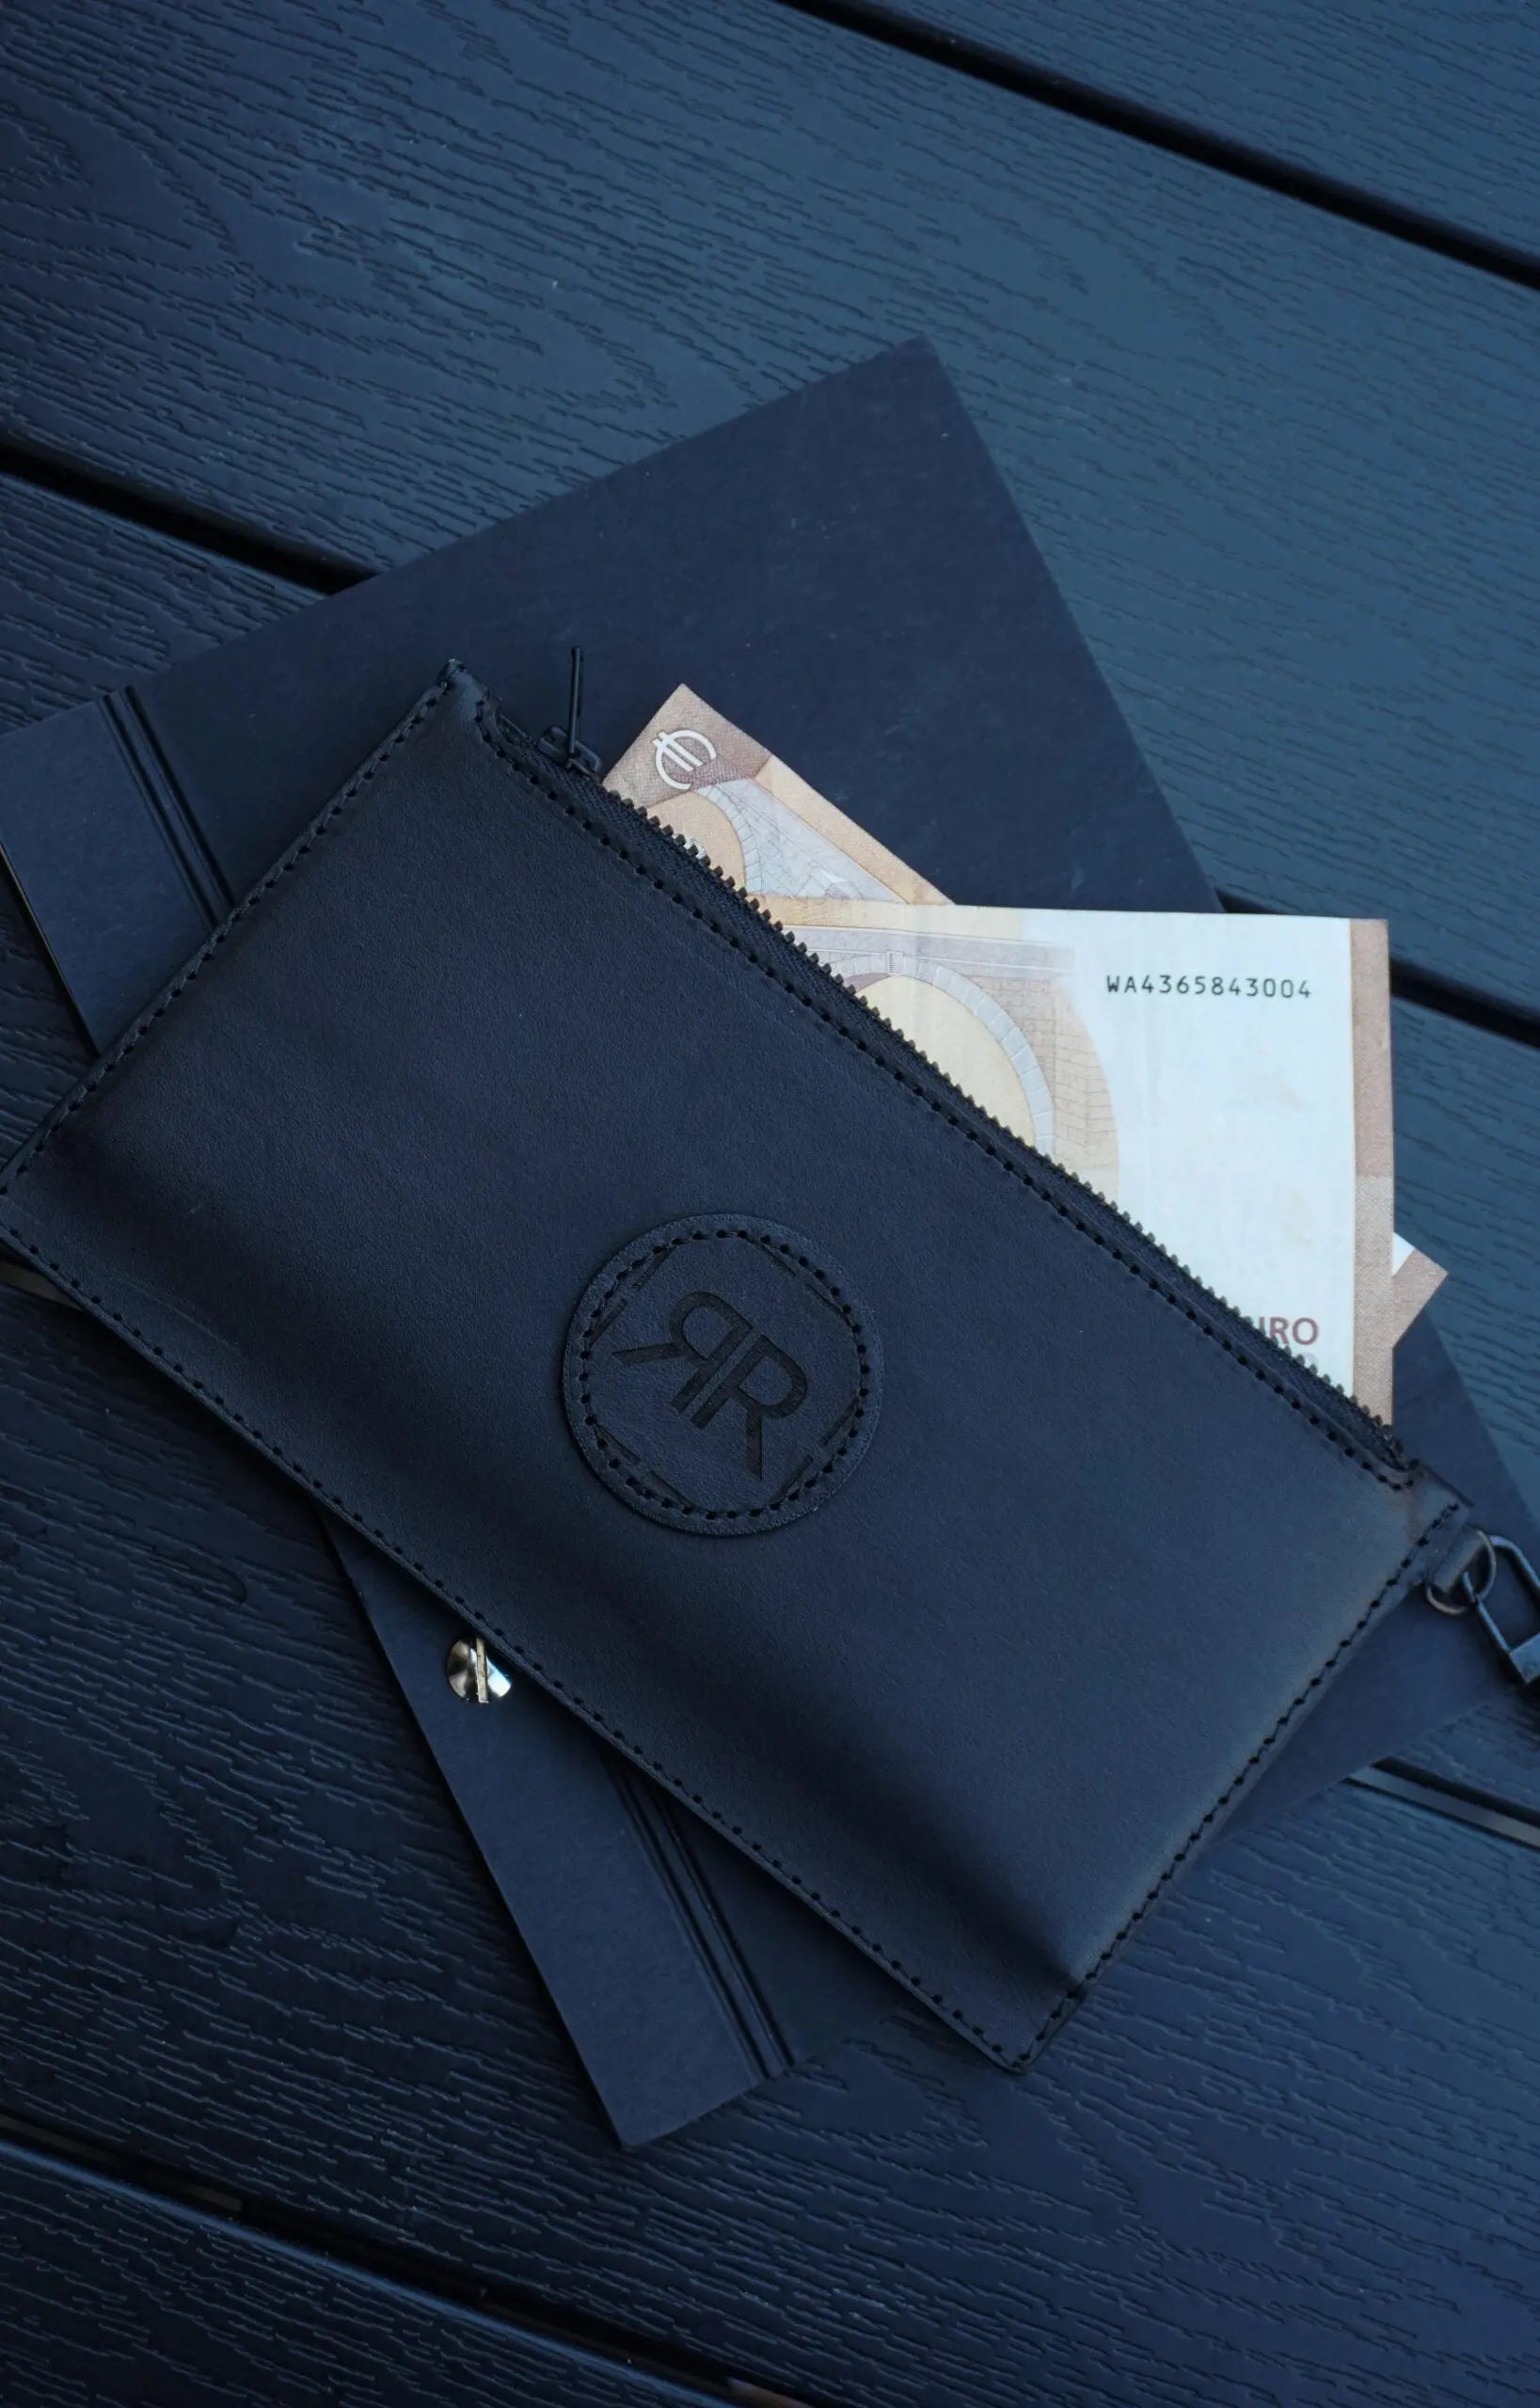 A sleek Leather Wristlet Wallet with removable wristlet, real leather, YKK zipper, three compartments, RR logo detail, handcrafted in Europe.